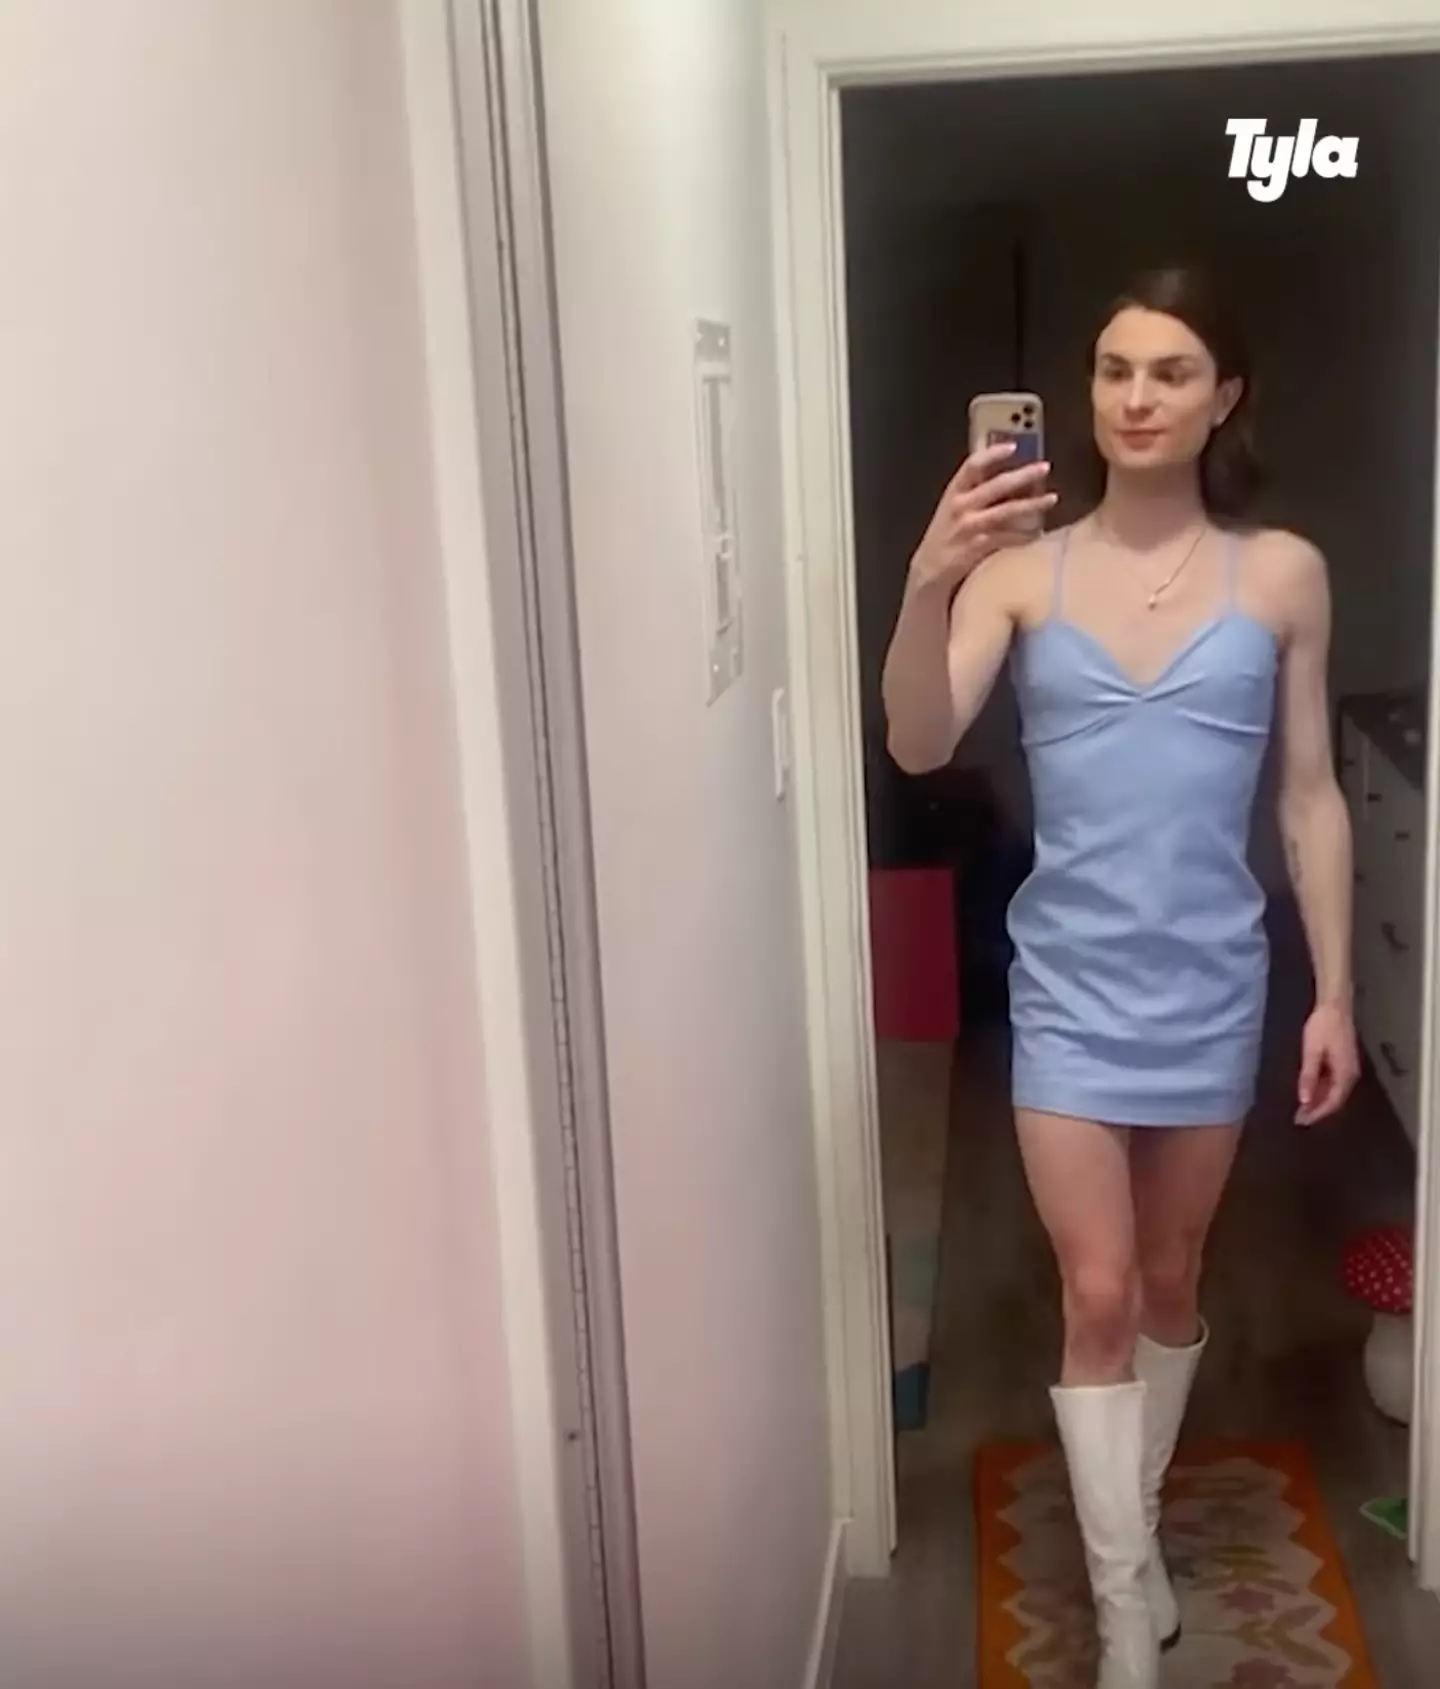 Dylan has shared footage of her transformation on TikTok.